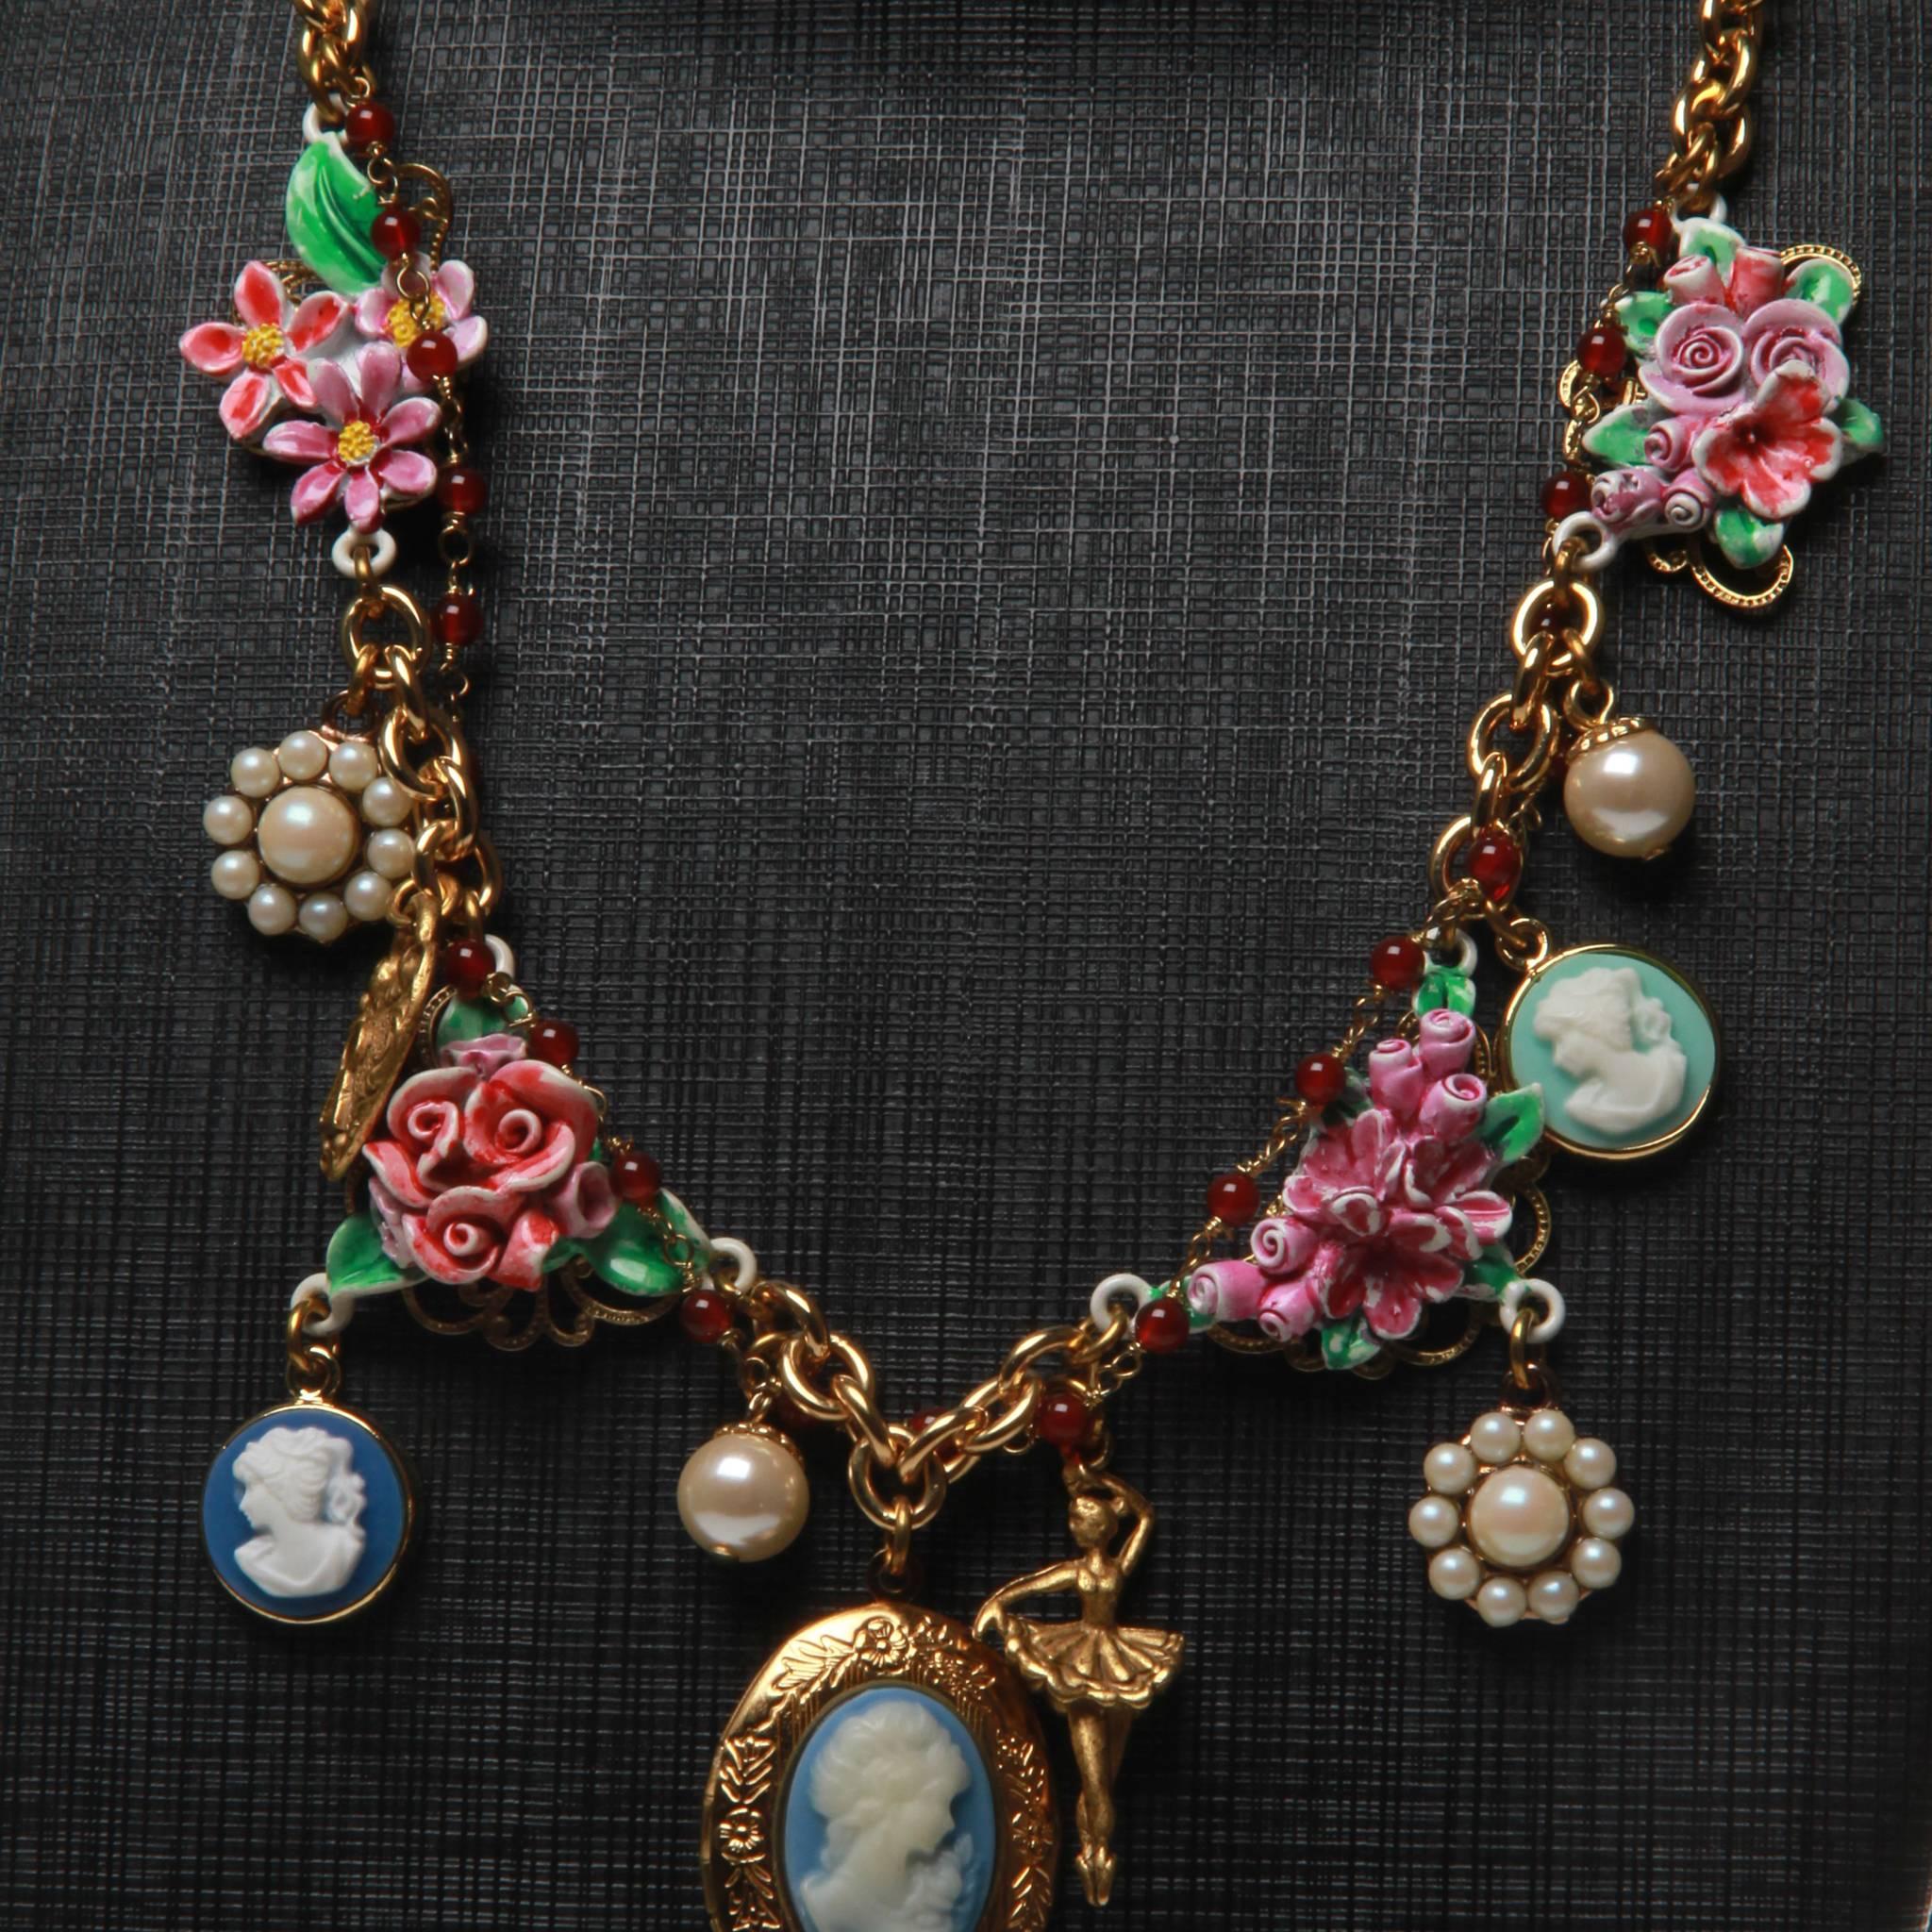 Made in Italy 

This lovely necklace is from the exclusive Main Line Dolce & Gabbana collection. It has been featured in several ad campaigns & on the runway. 
Lots of detail- It features a central blue cameo locket, smaller blue cameos, 